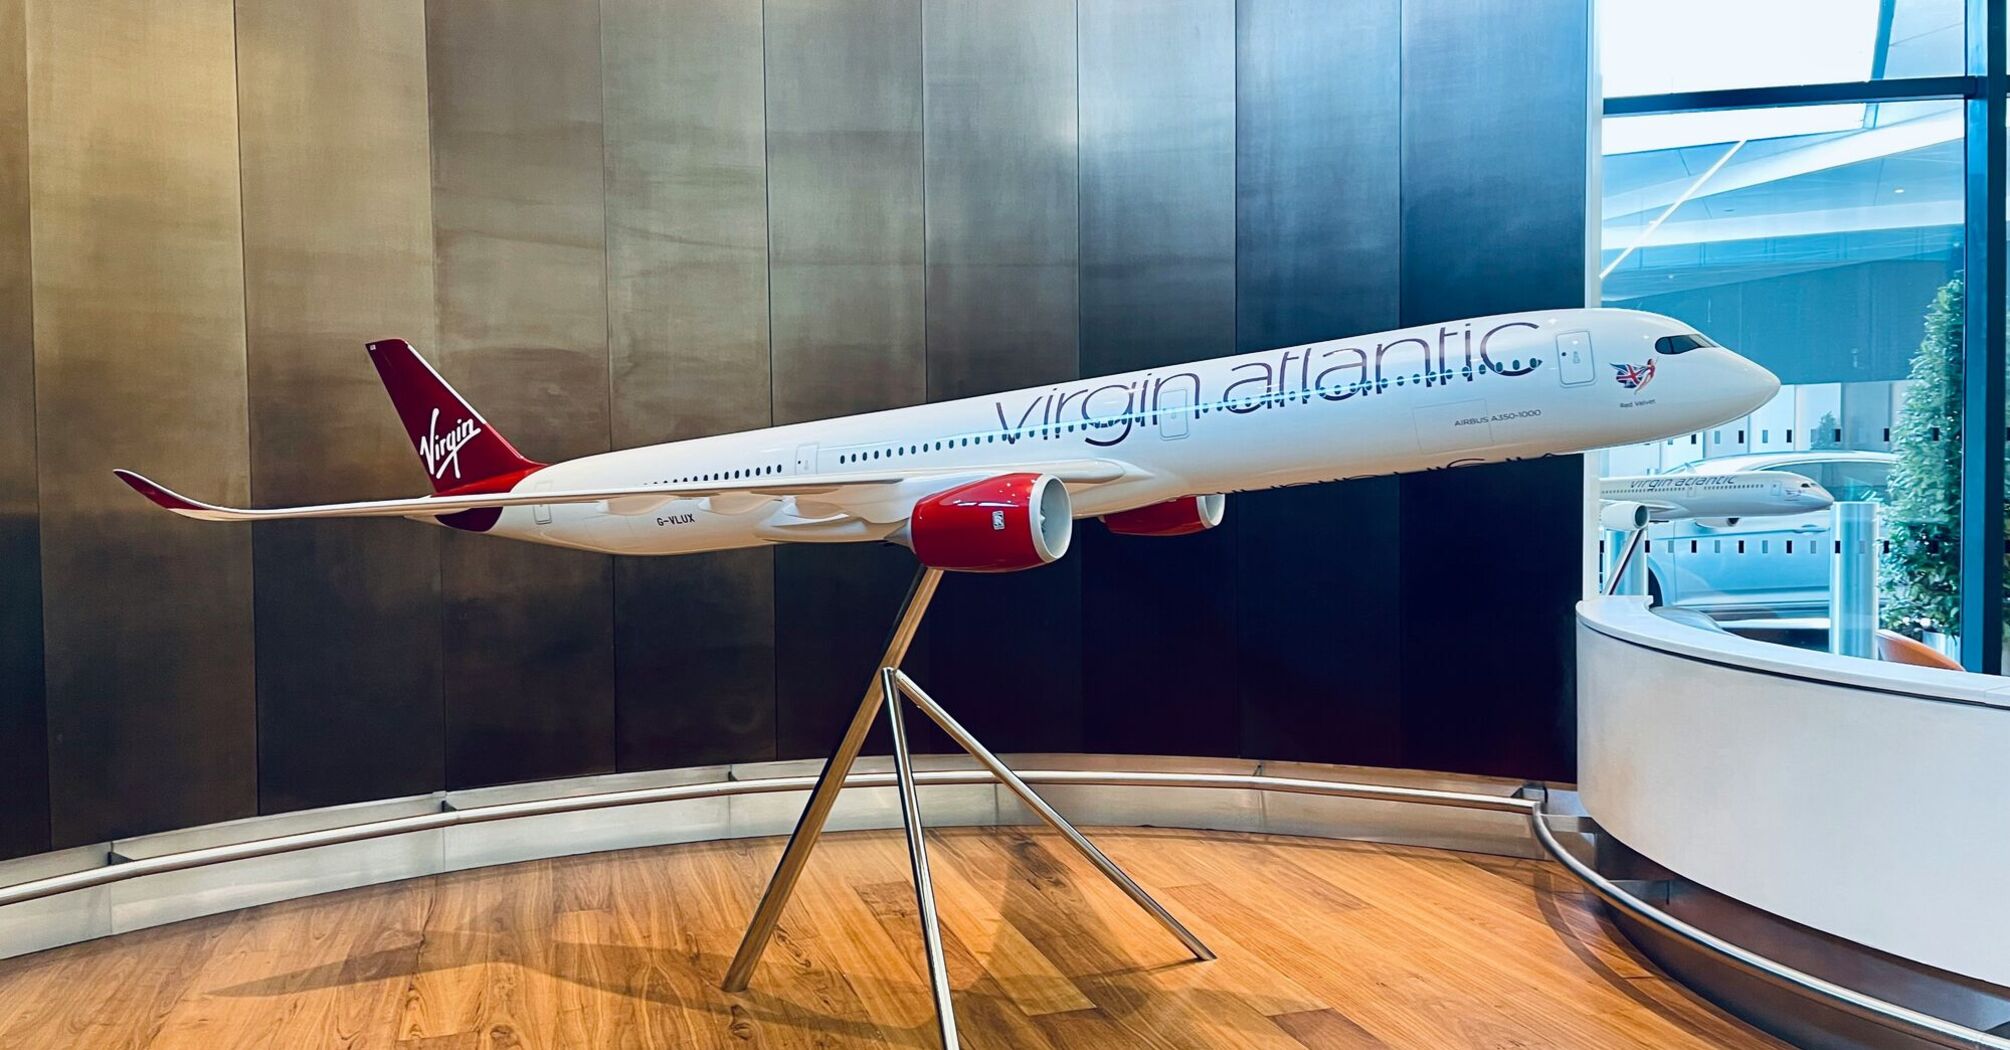 A model of a virgin atlantic airplane on a stand